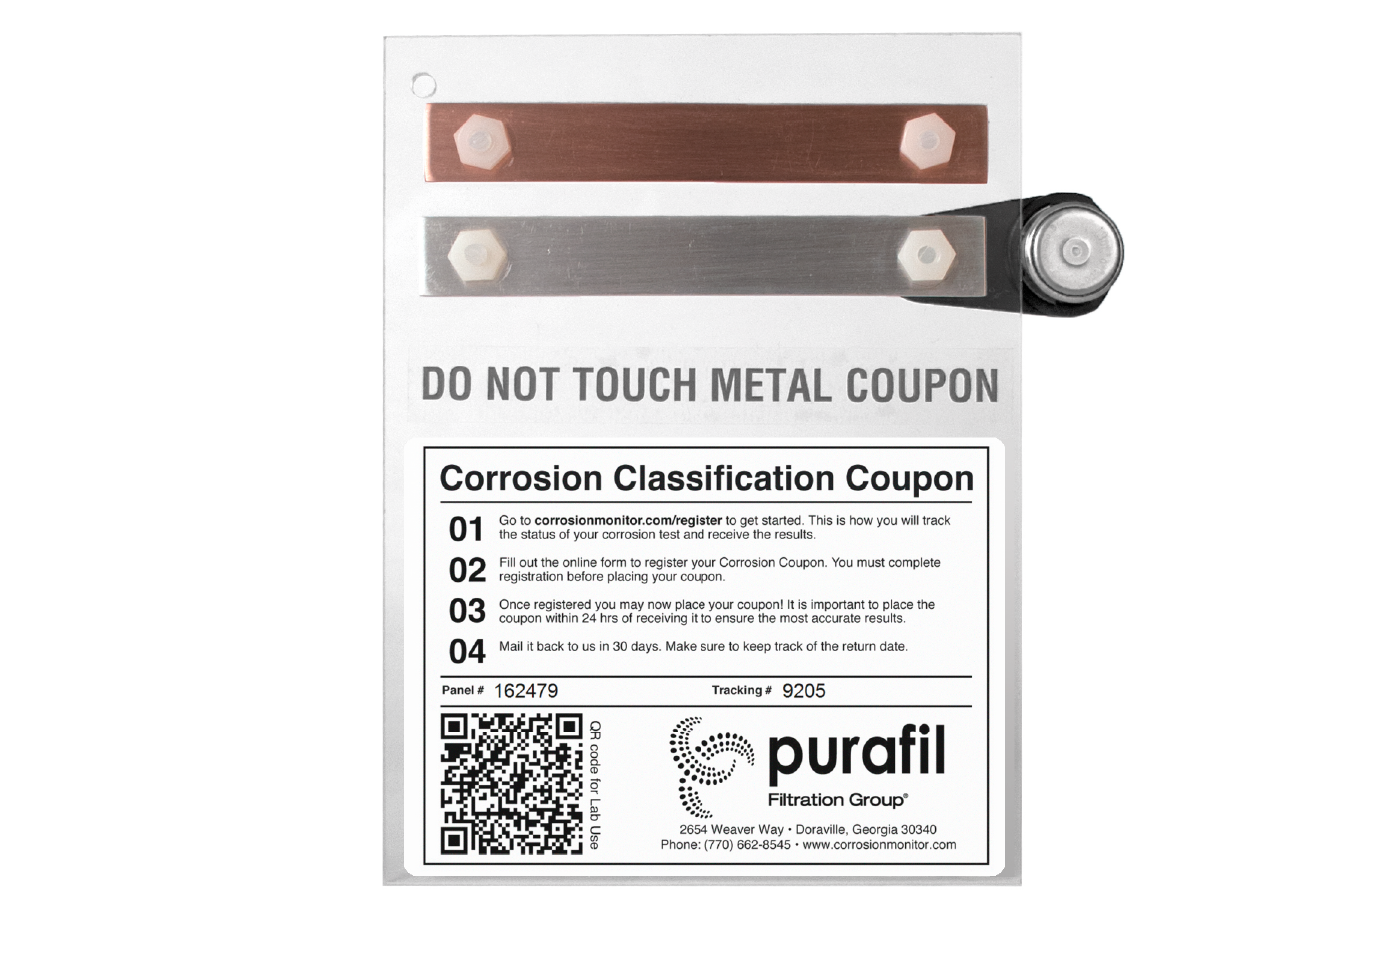 Corrosion Classification Coupon + Temperature and Relative Humidity